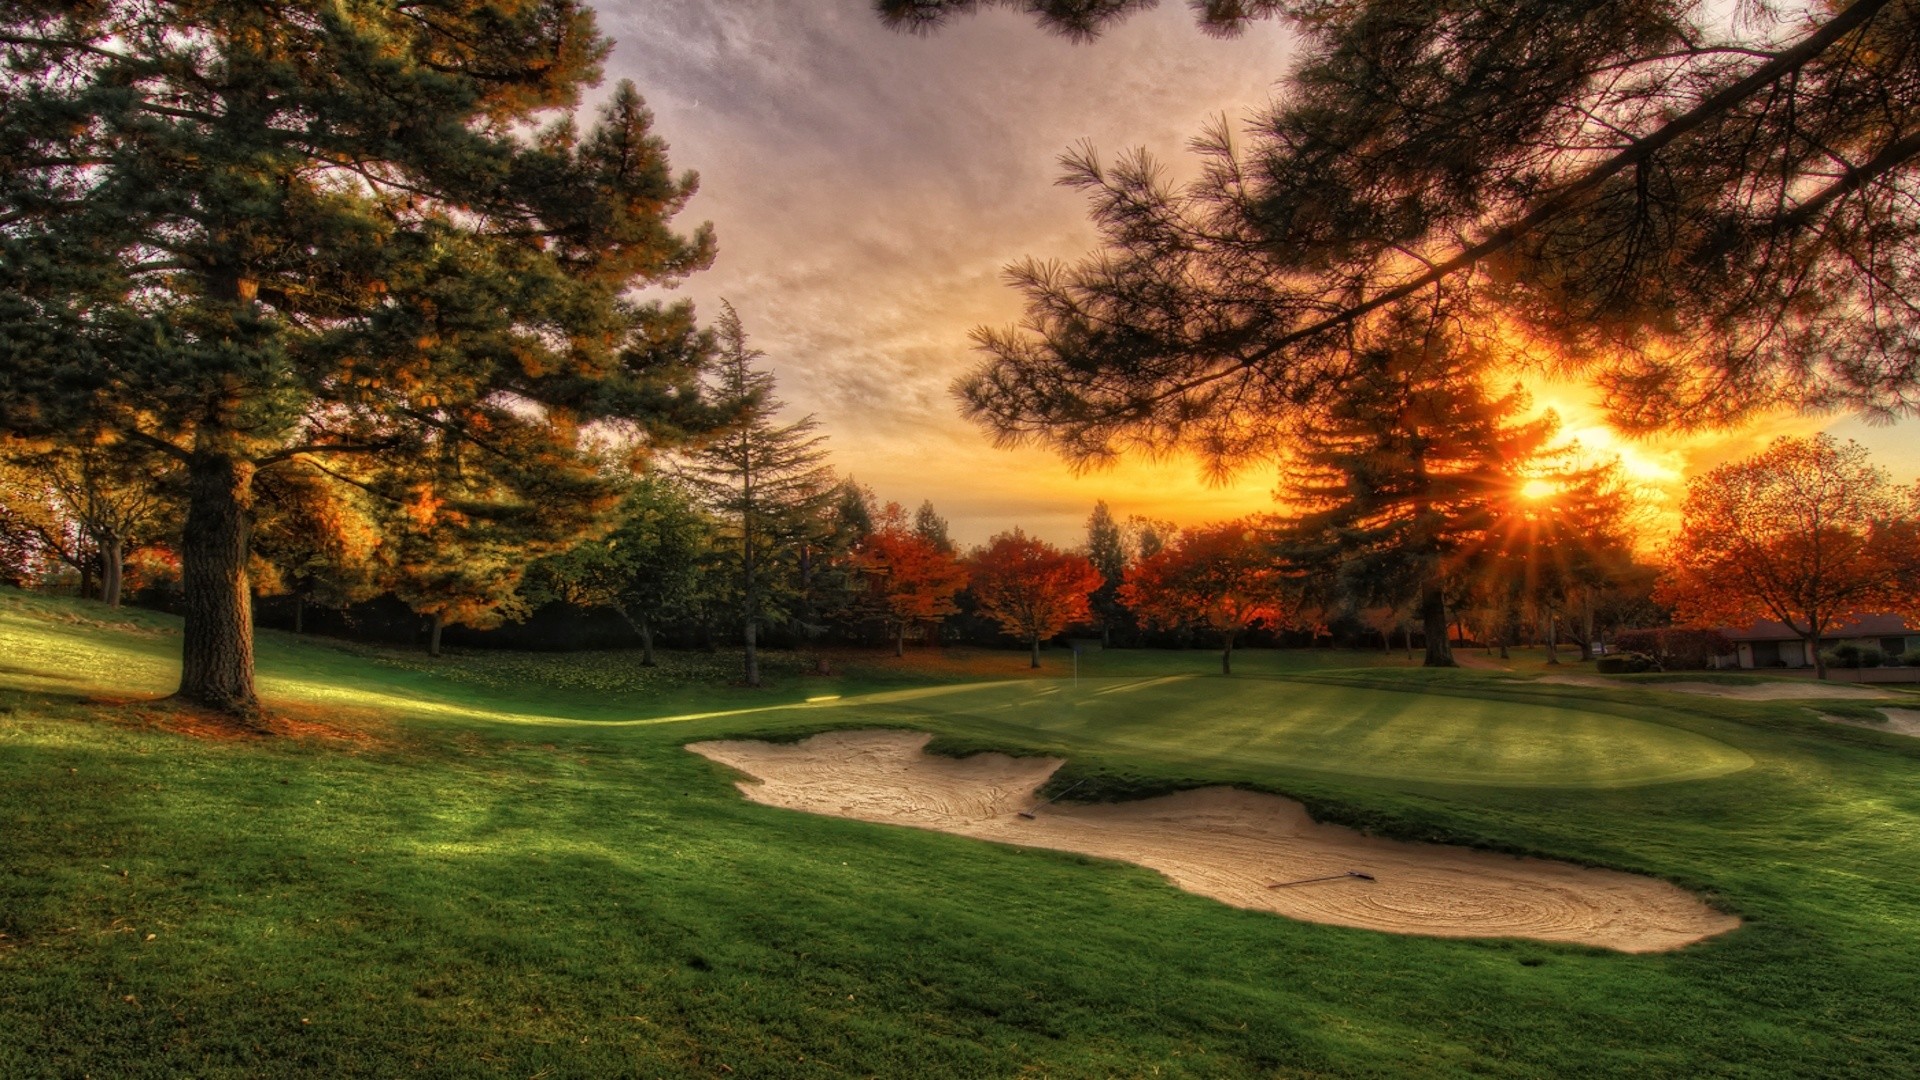 Scenic wallpaper hdr high resolution Download Golf Sunset Hdr 248786 background